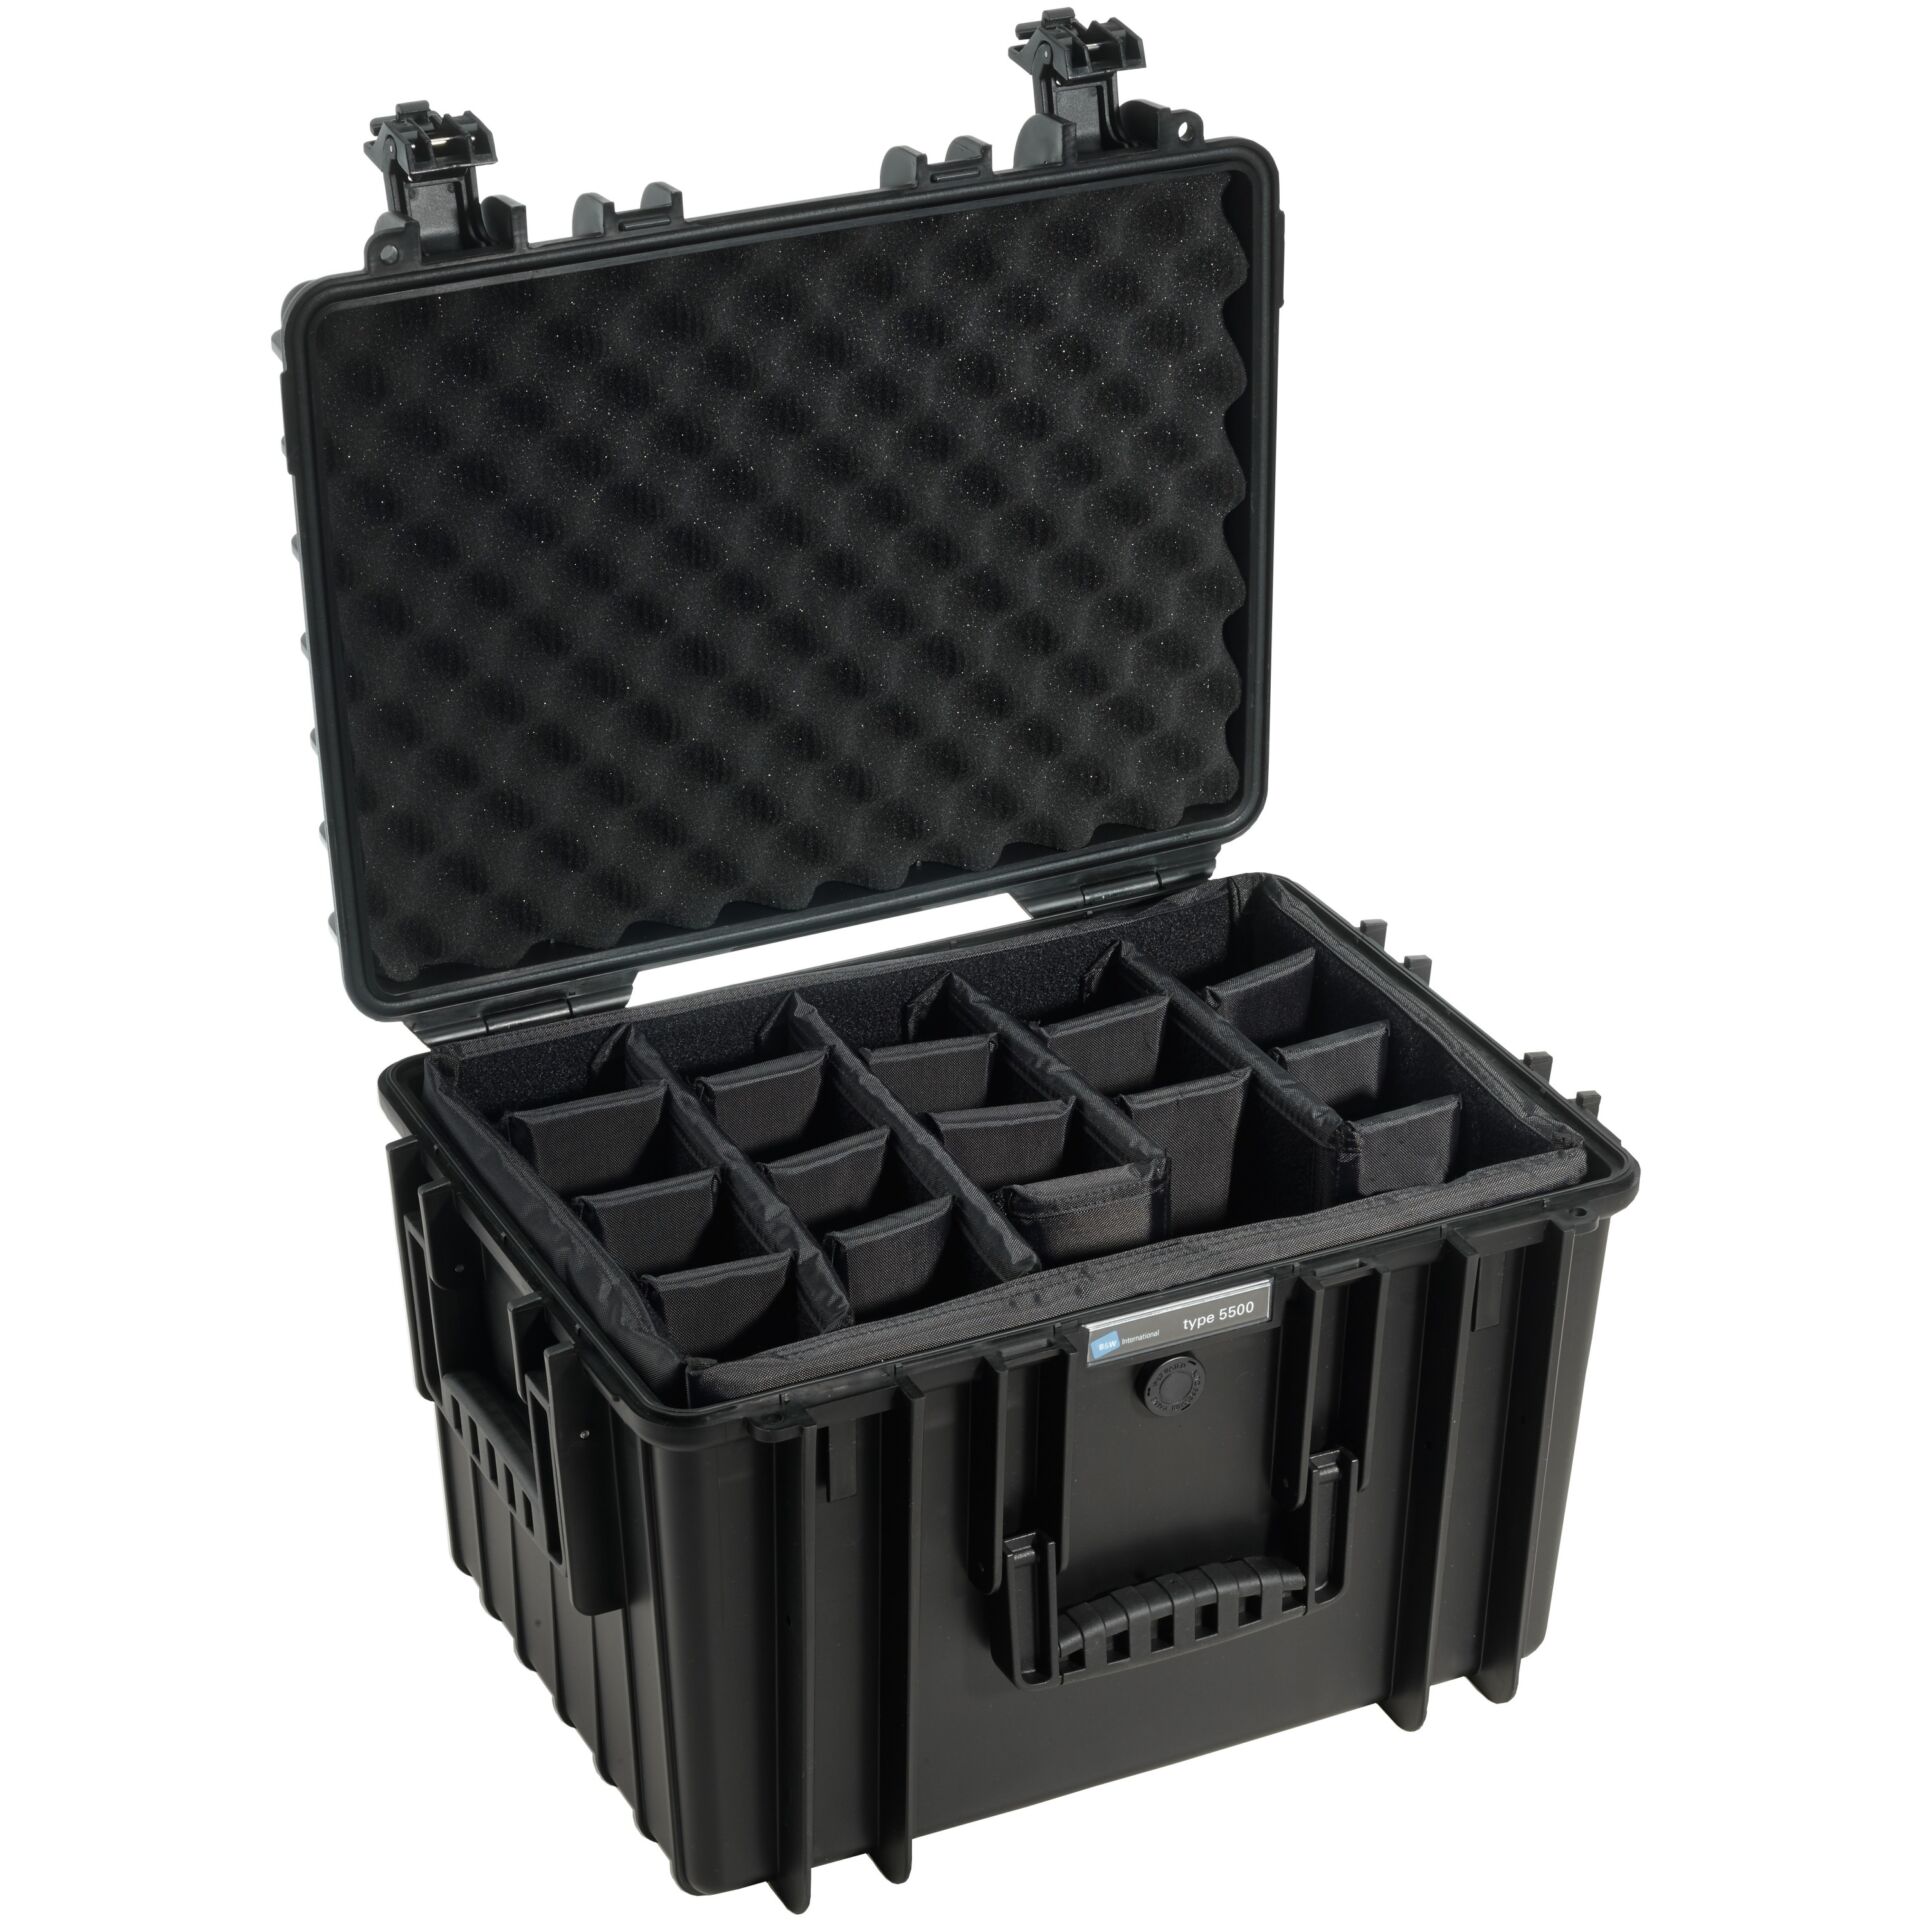 B&W Outdoor Case 5500 incl. divider system black